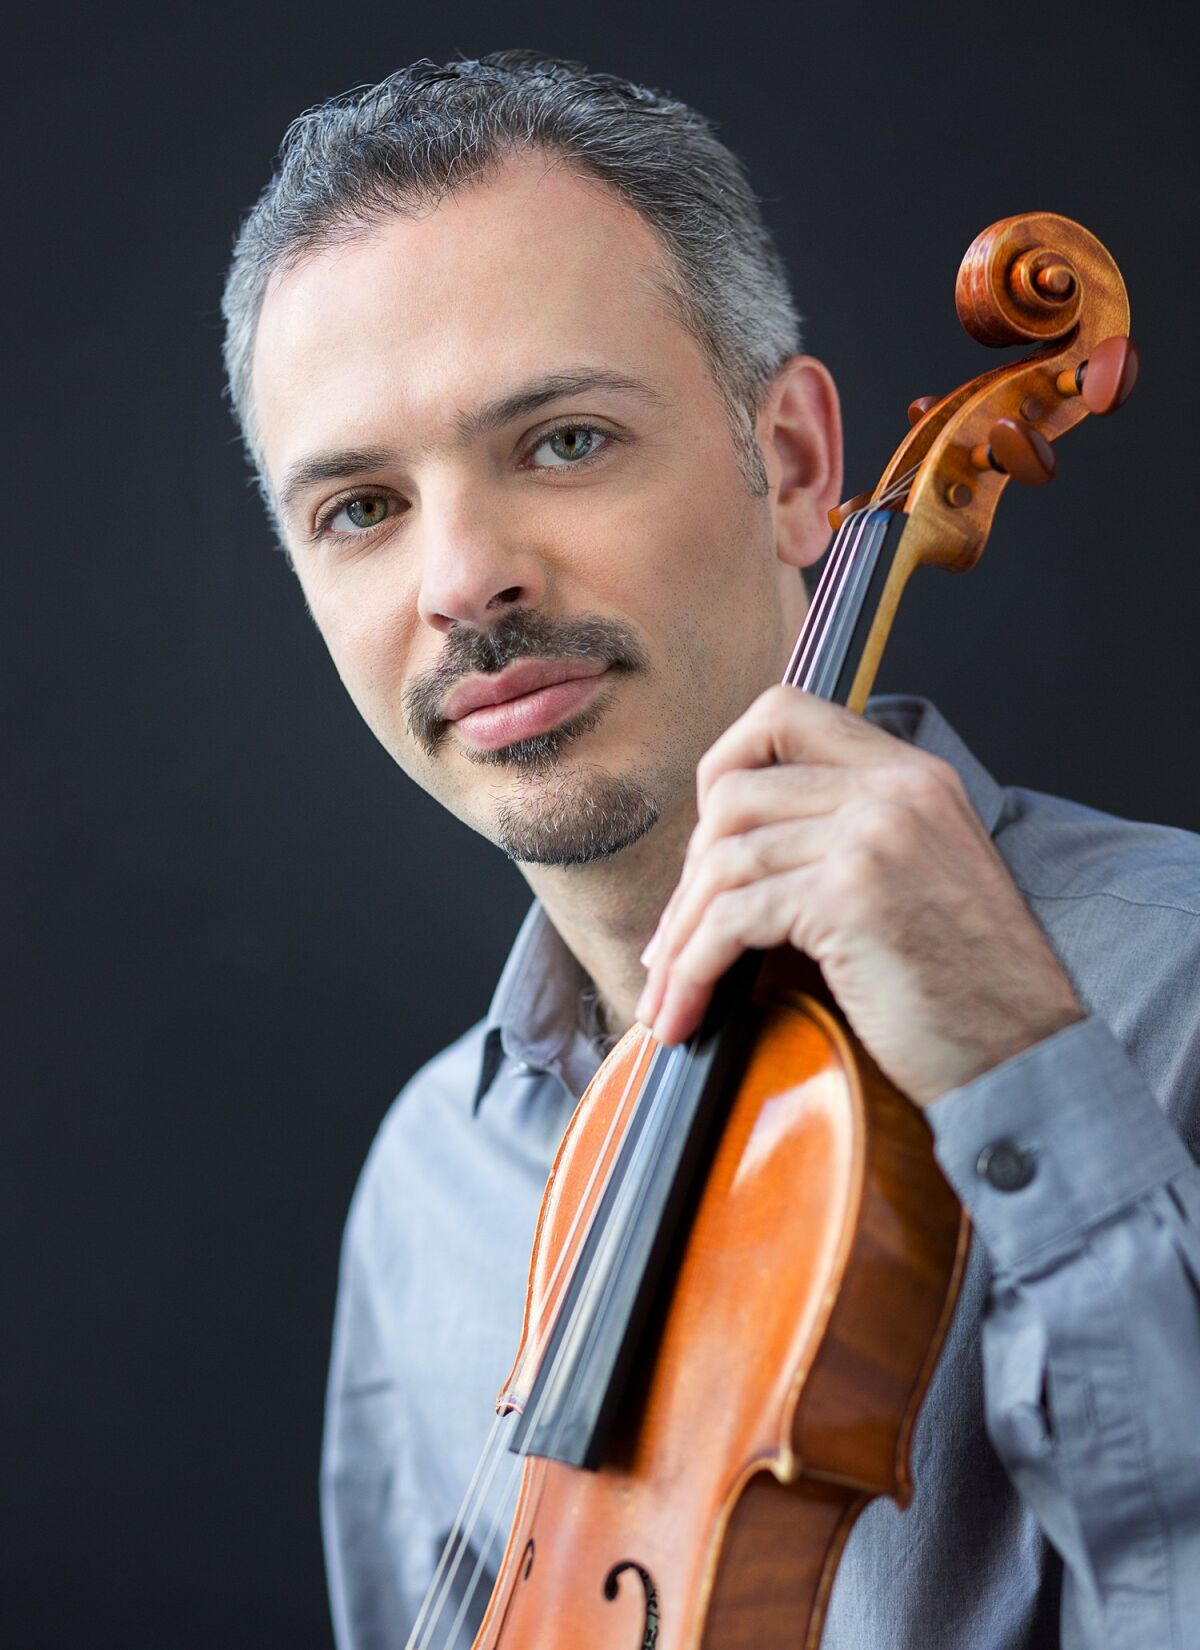 Violinist Colin Jacobsen will perform at the Athenaeum Music & Arts Library in La Jolla on Monday, November 21st.